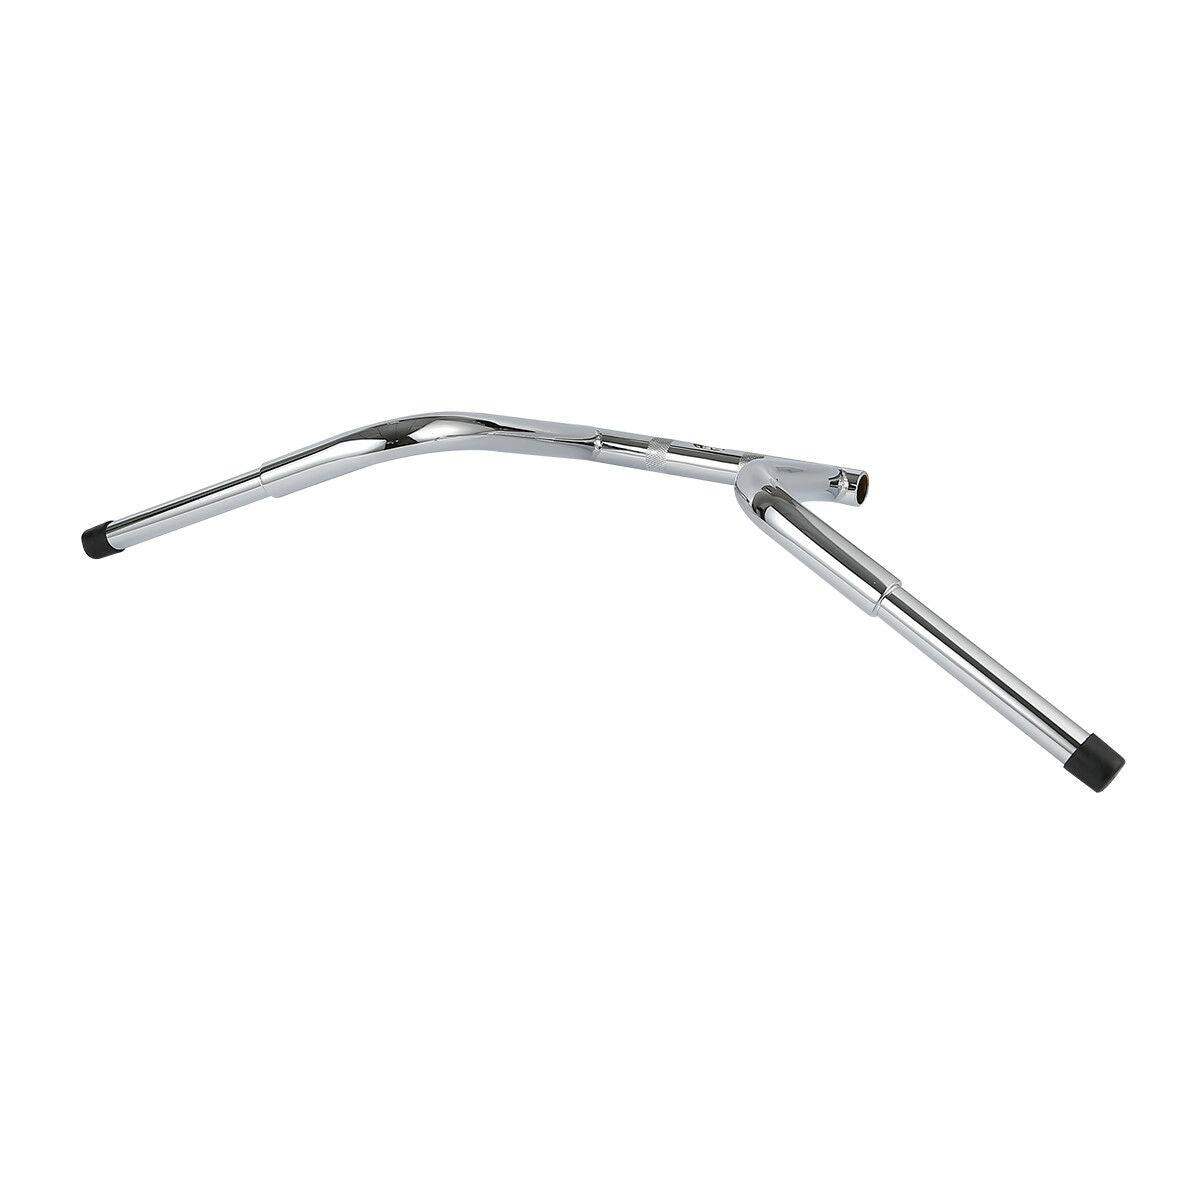 12" Rise 1 1/4'' Handlebar Fit For Harley Dyna Street Bob FXDB 06-17 FXDF 08-17 - Moto Life Products